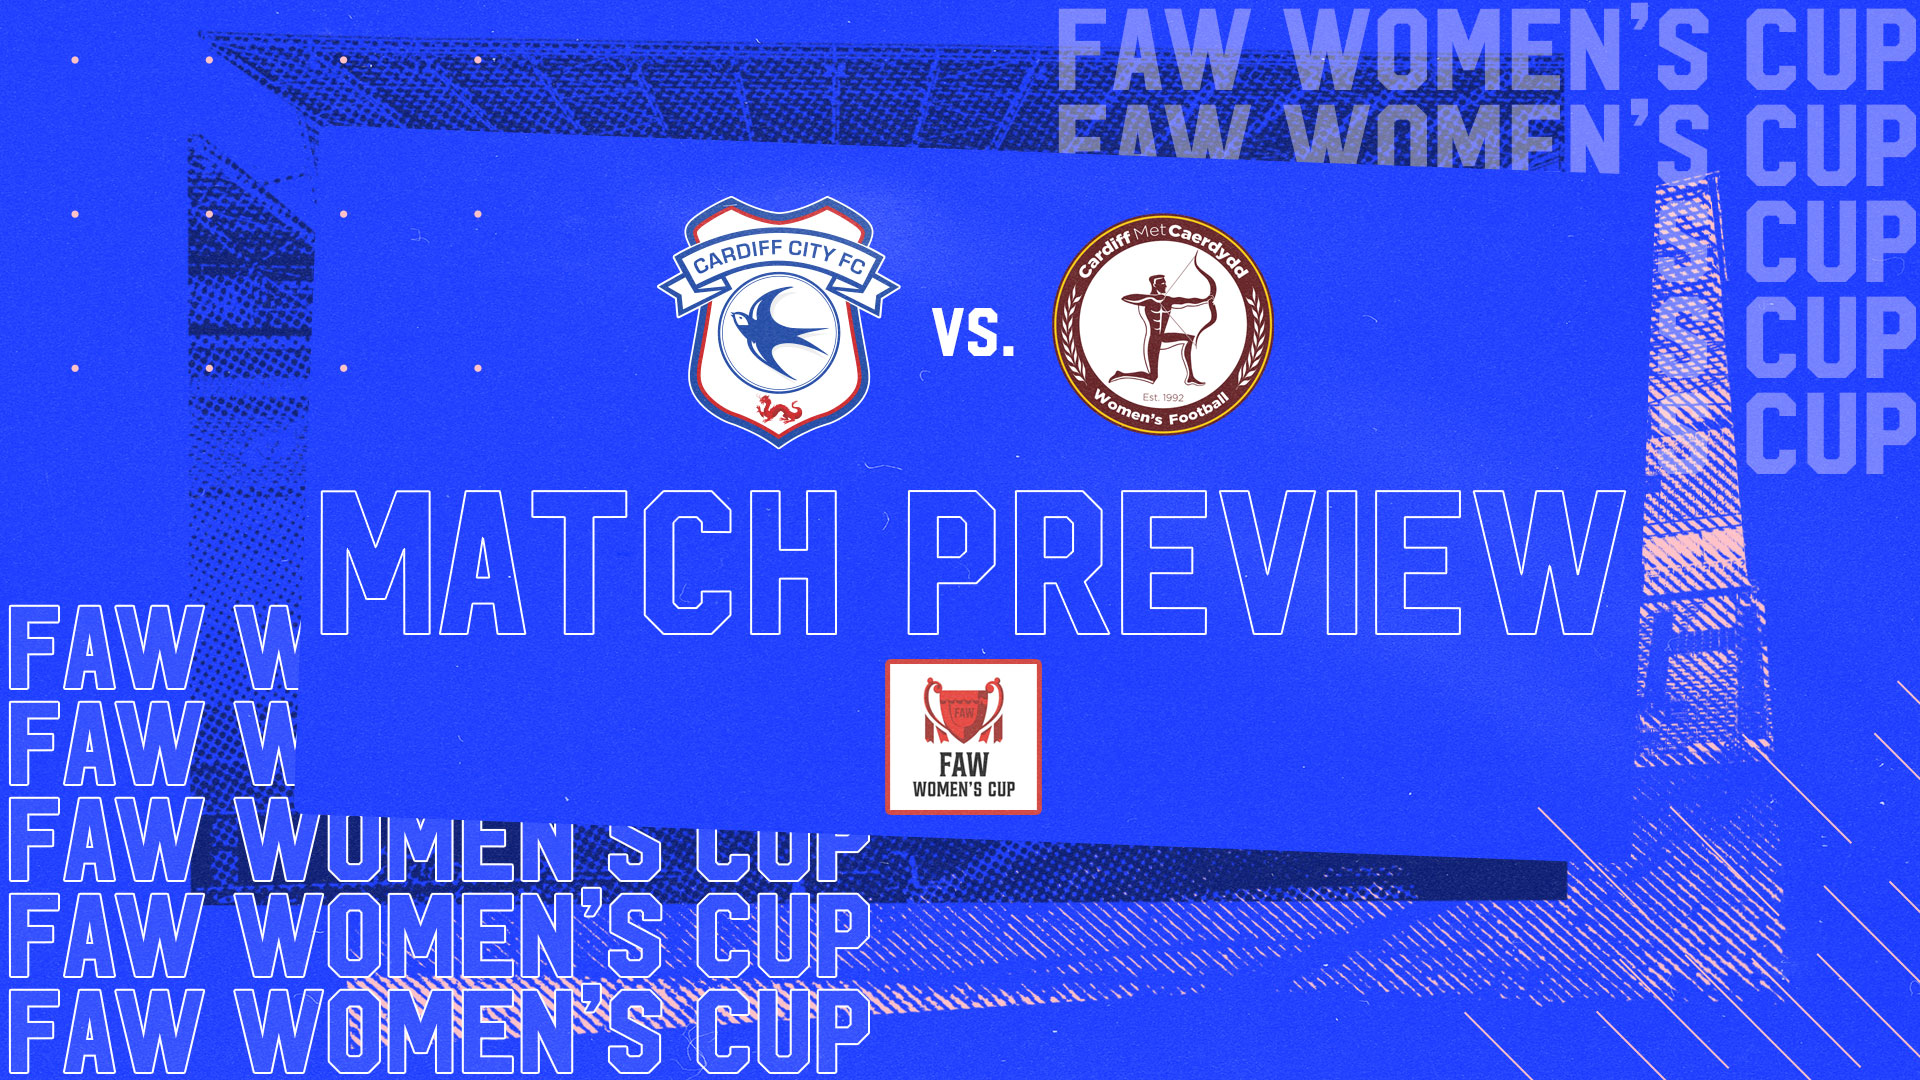 Cardiff Met and Cardiff City do battle this Sunday in the FAW Women's Cup final...